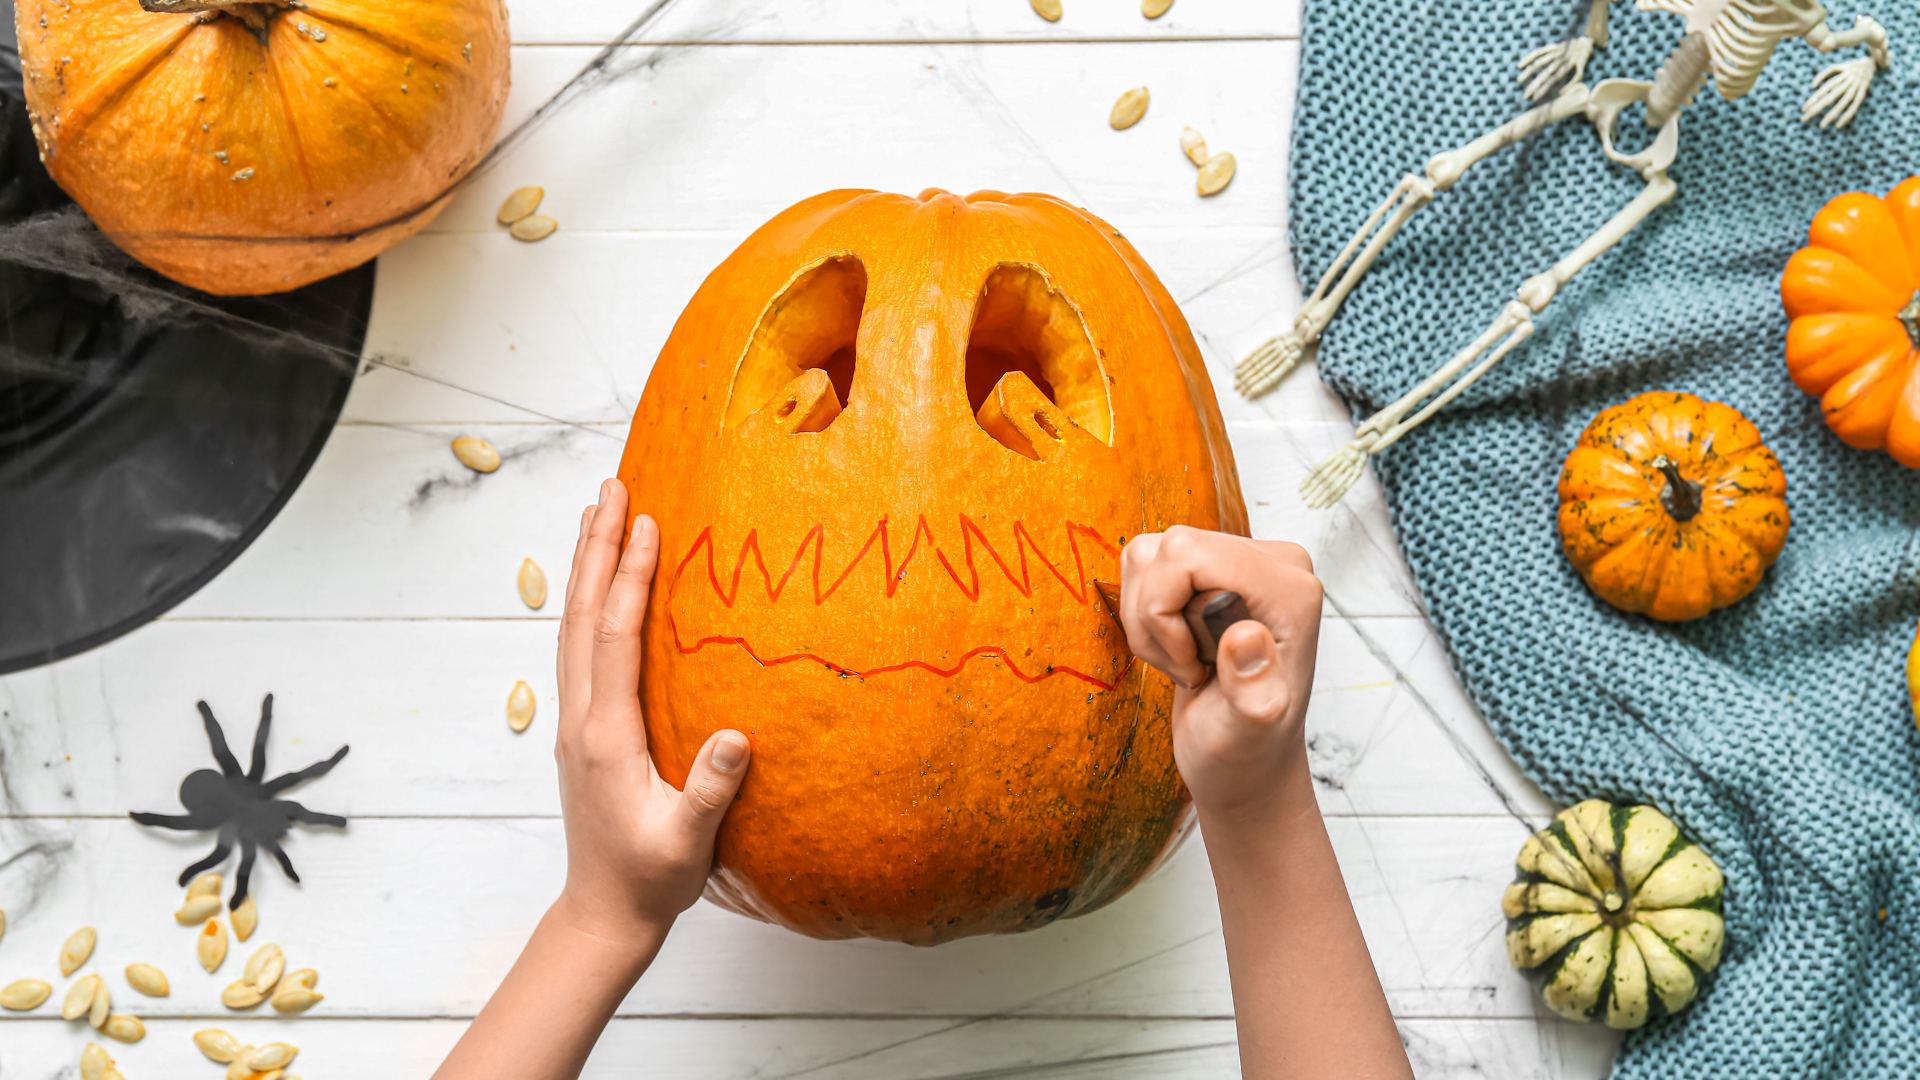 The very first step to prolonging your jack-o’-lanterns is to not carve them too soon. In this ca...